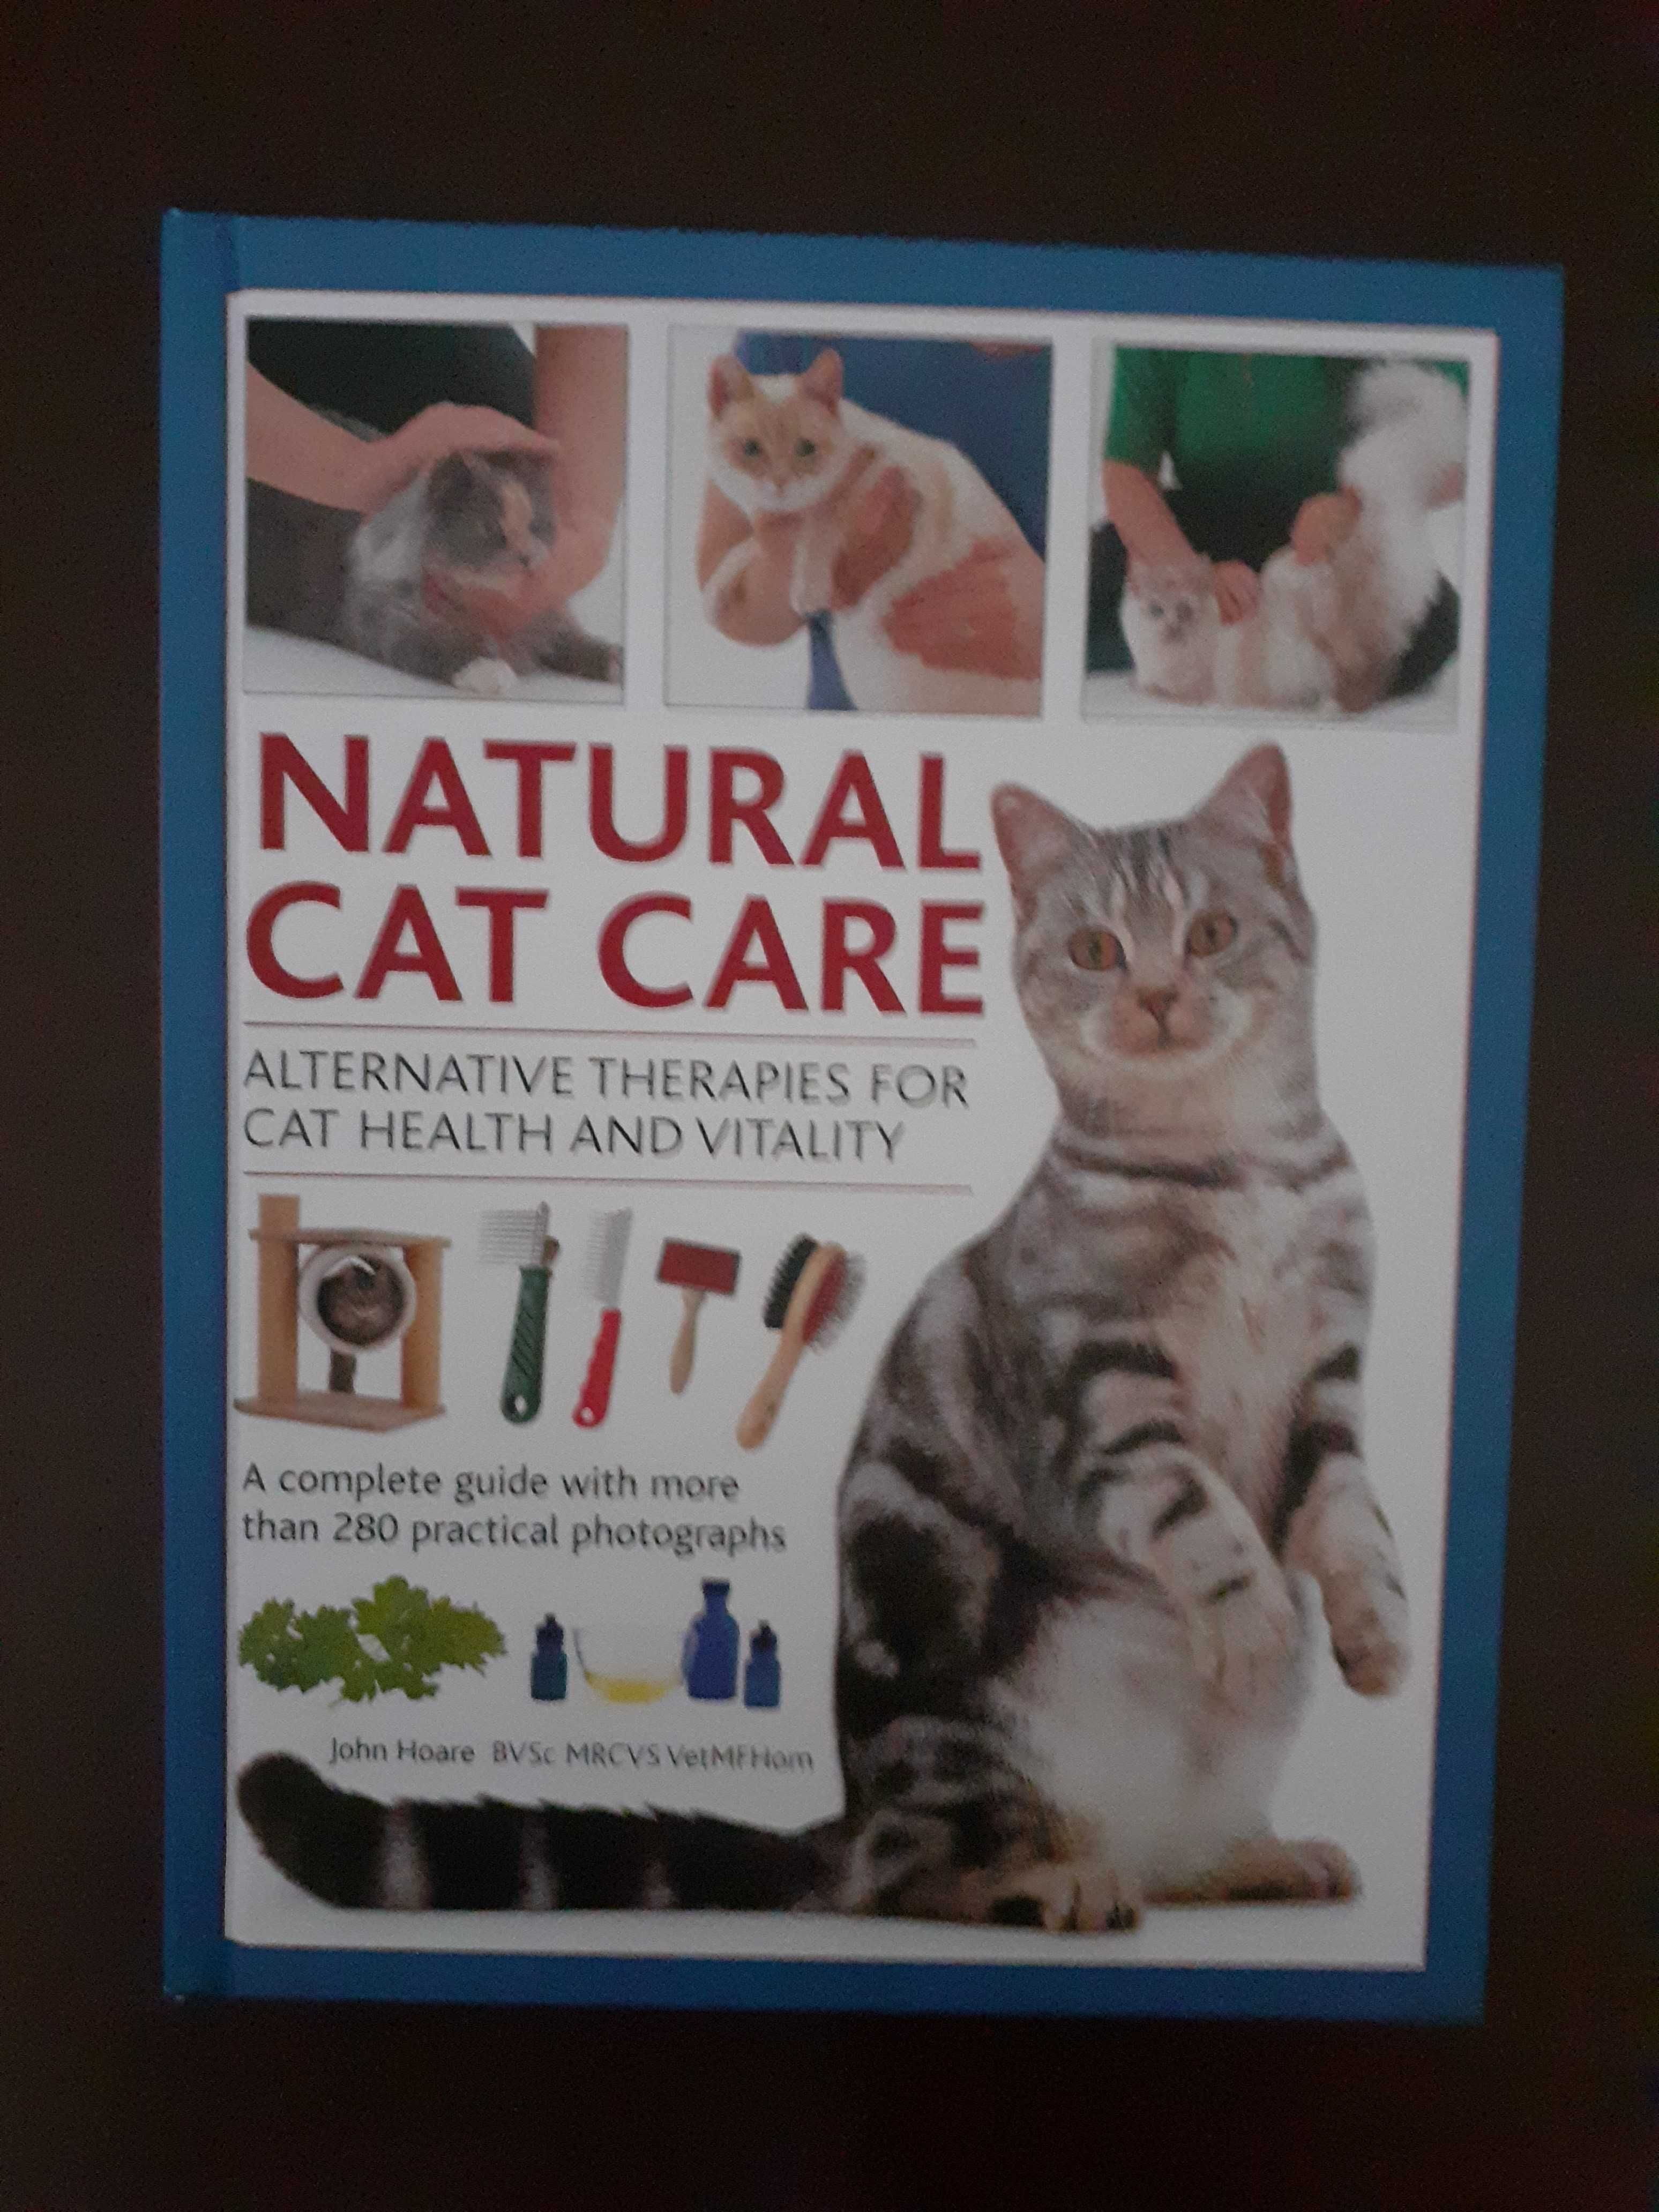 Natural cat care - alternative therapies for cat health and vitality